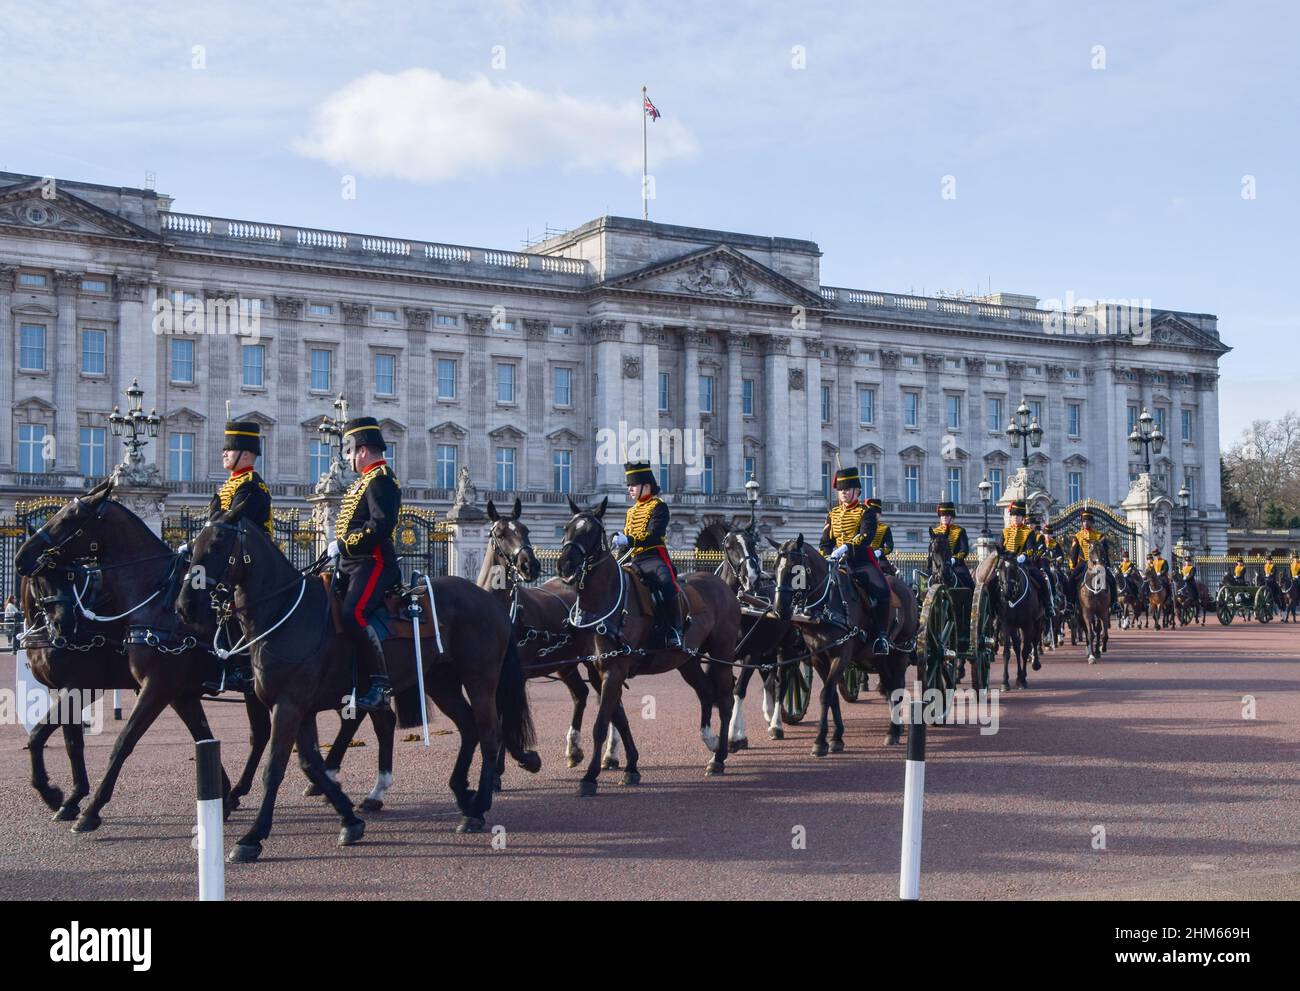 London, UK. 7th February 2022. The King's Troops ride past Buckingham Palace after the gun salute at Green Park, part of the Queen's Platinum Jubilee celebrations. Credit: Vuk Valcic / Alamy Live News Stock Photo